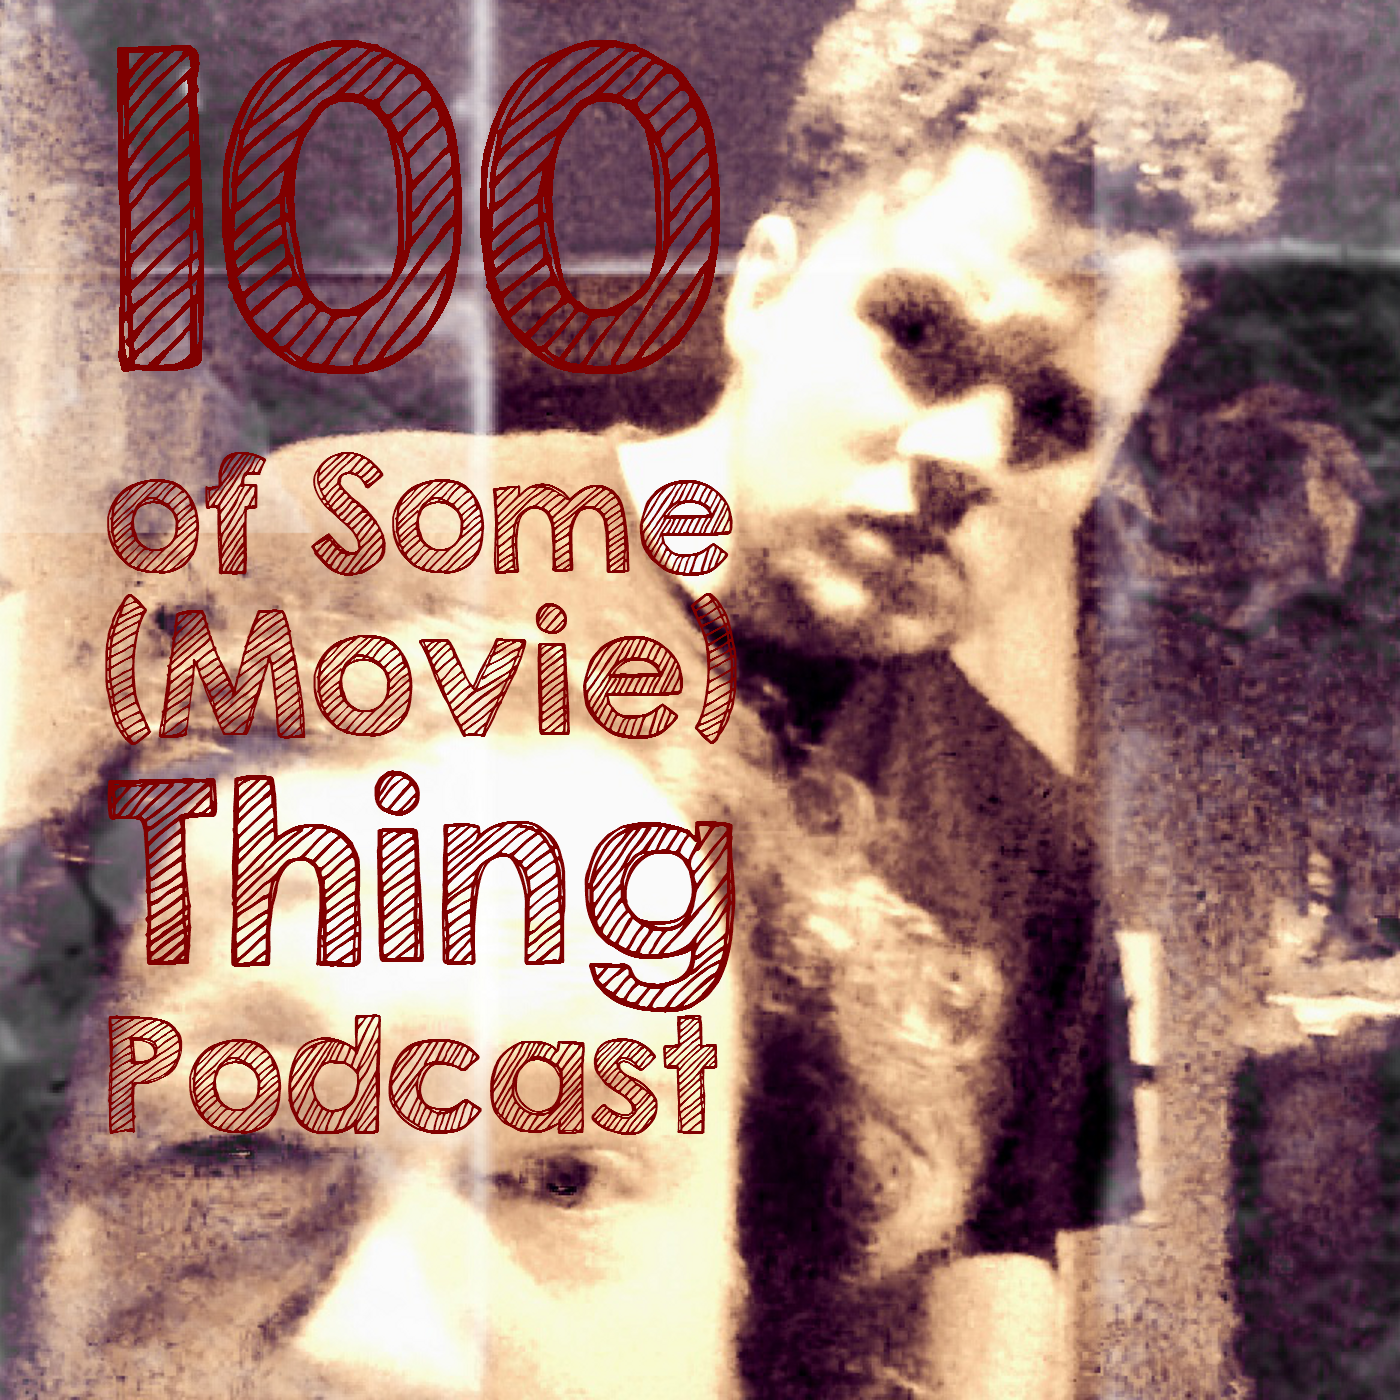 100 of Some(Movie)Thing 032, Tootsie